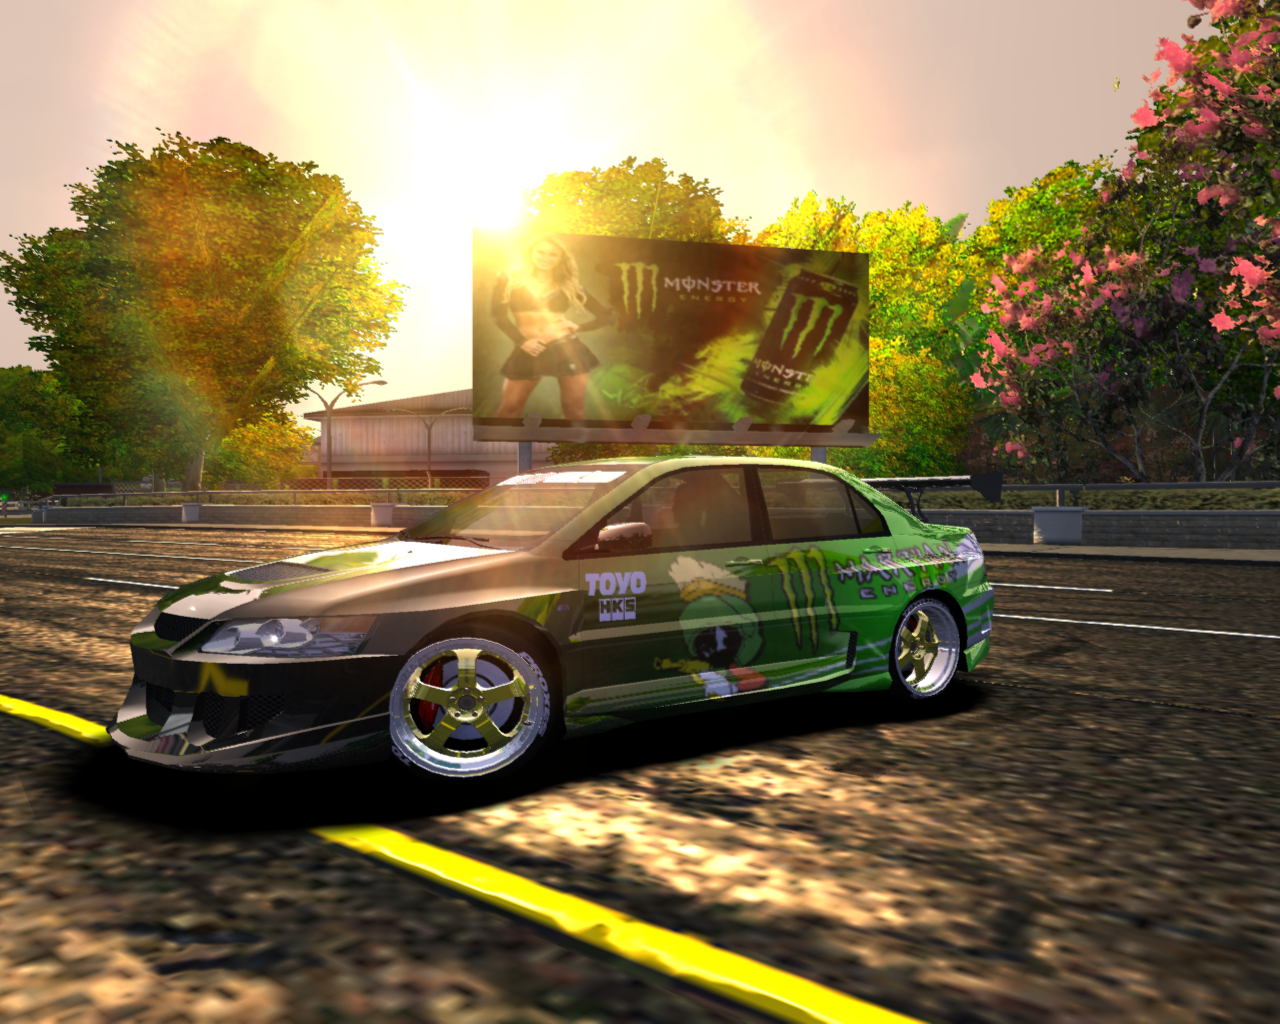 Need For Speed Most Wanted Mitsubishi Martian Energy Vinyl for Evo VIII